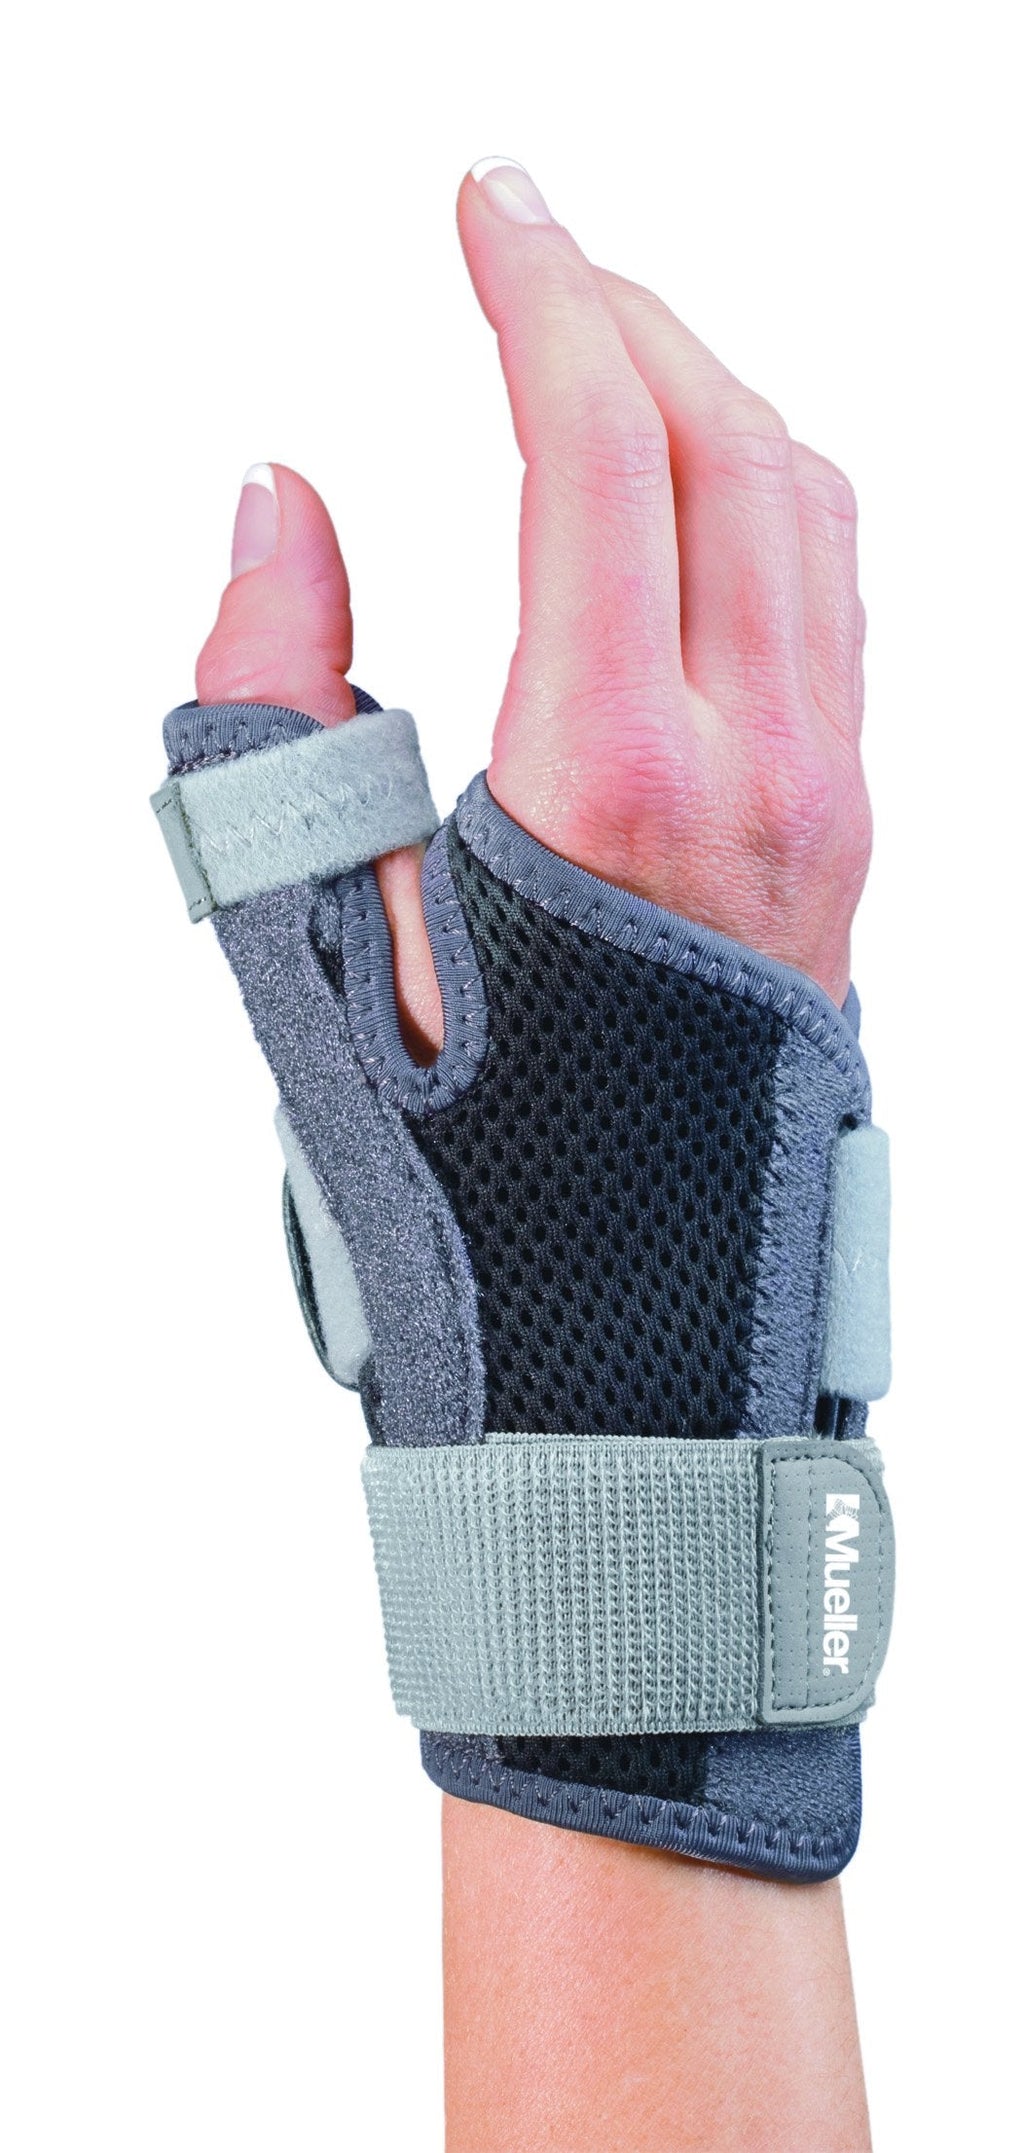 [Australia] - Mueller Sports Medicine Adjust-to-Fit Thumb Stabilizer, For Men and Women, Gray, One Size Fits Most 